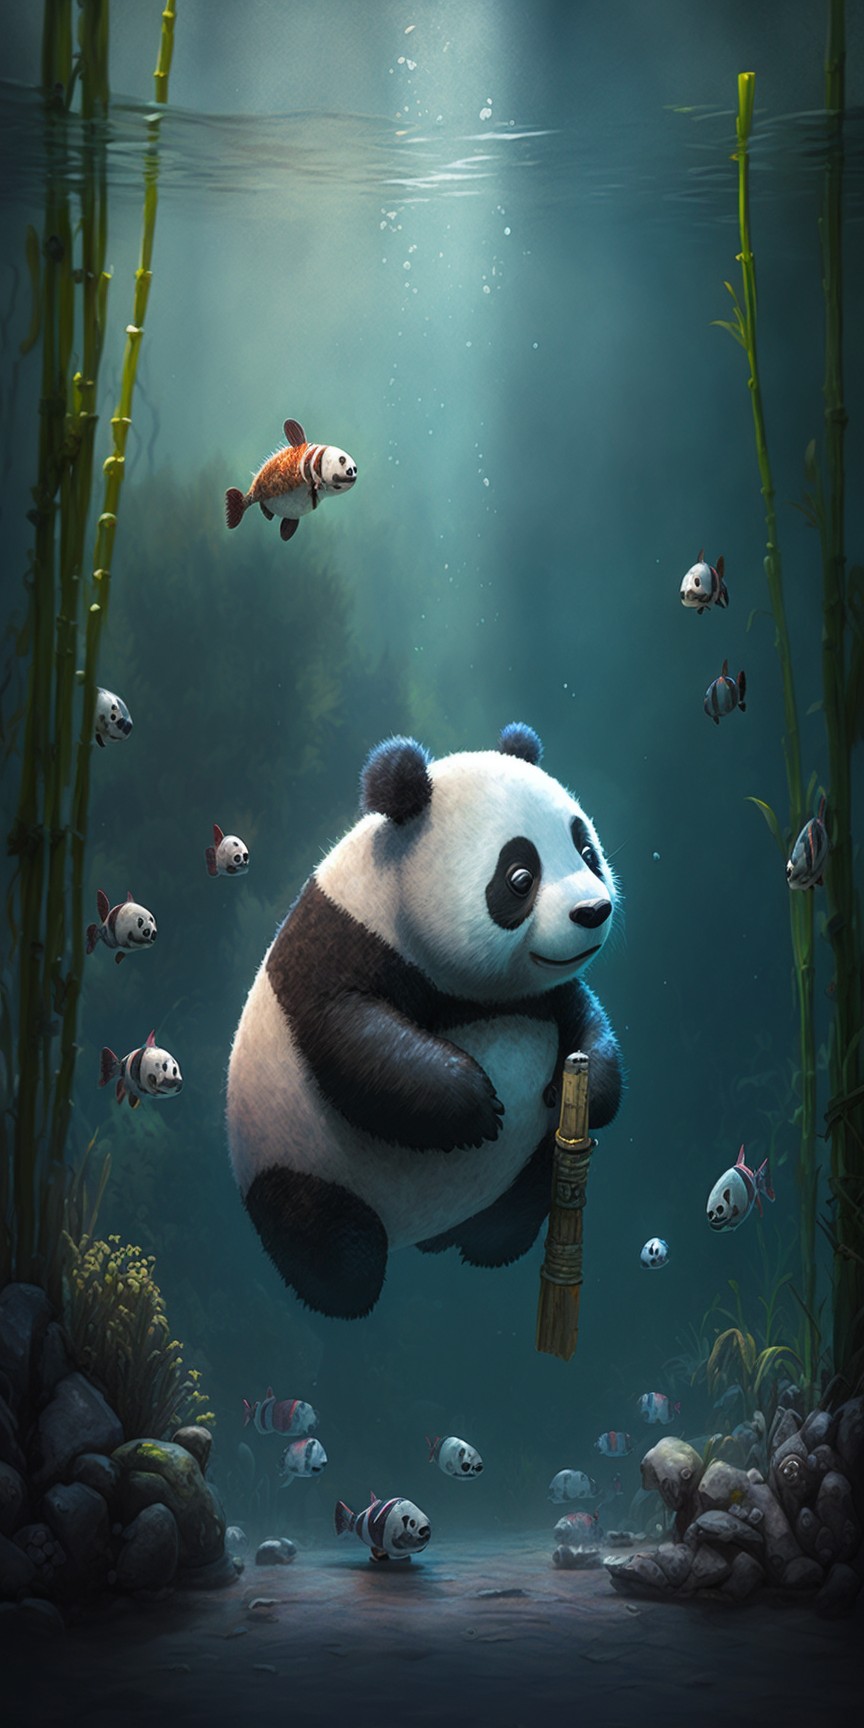 8 images of Panda catching fish in water by Midjourney